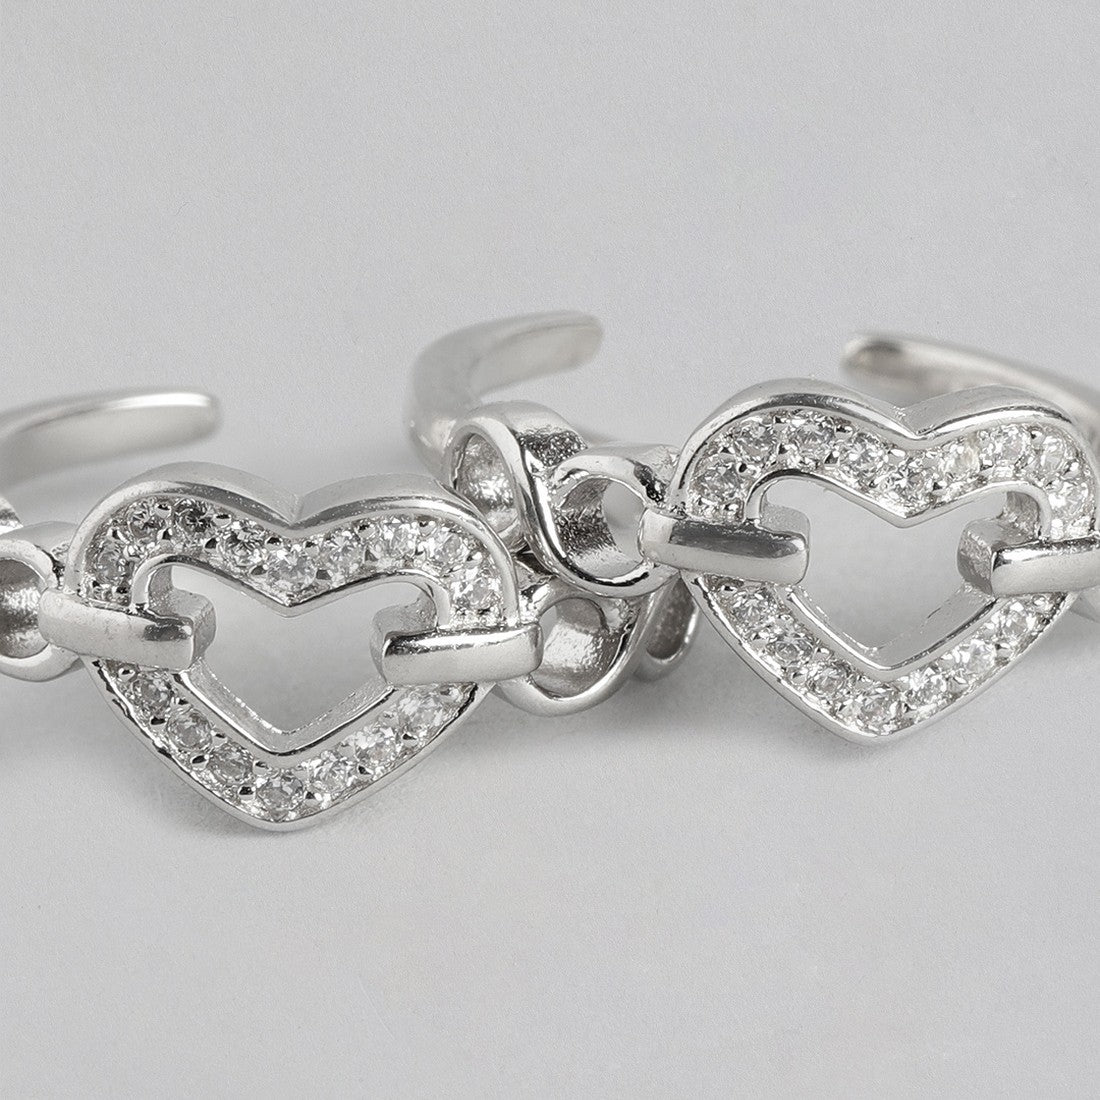 Infinity Heart Silver 925 Silver Toe Ring